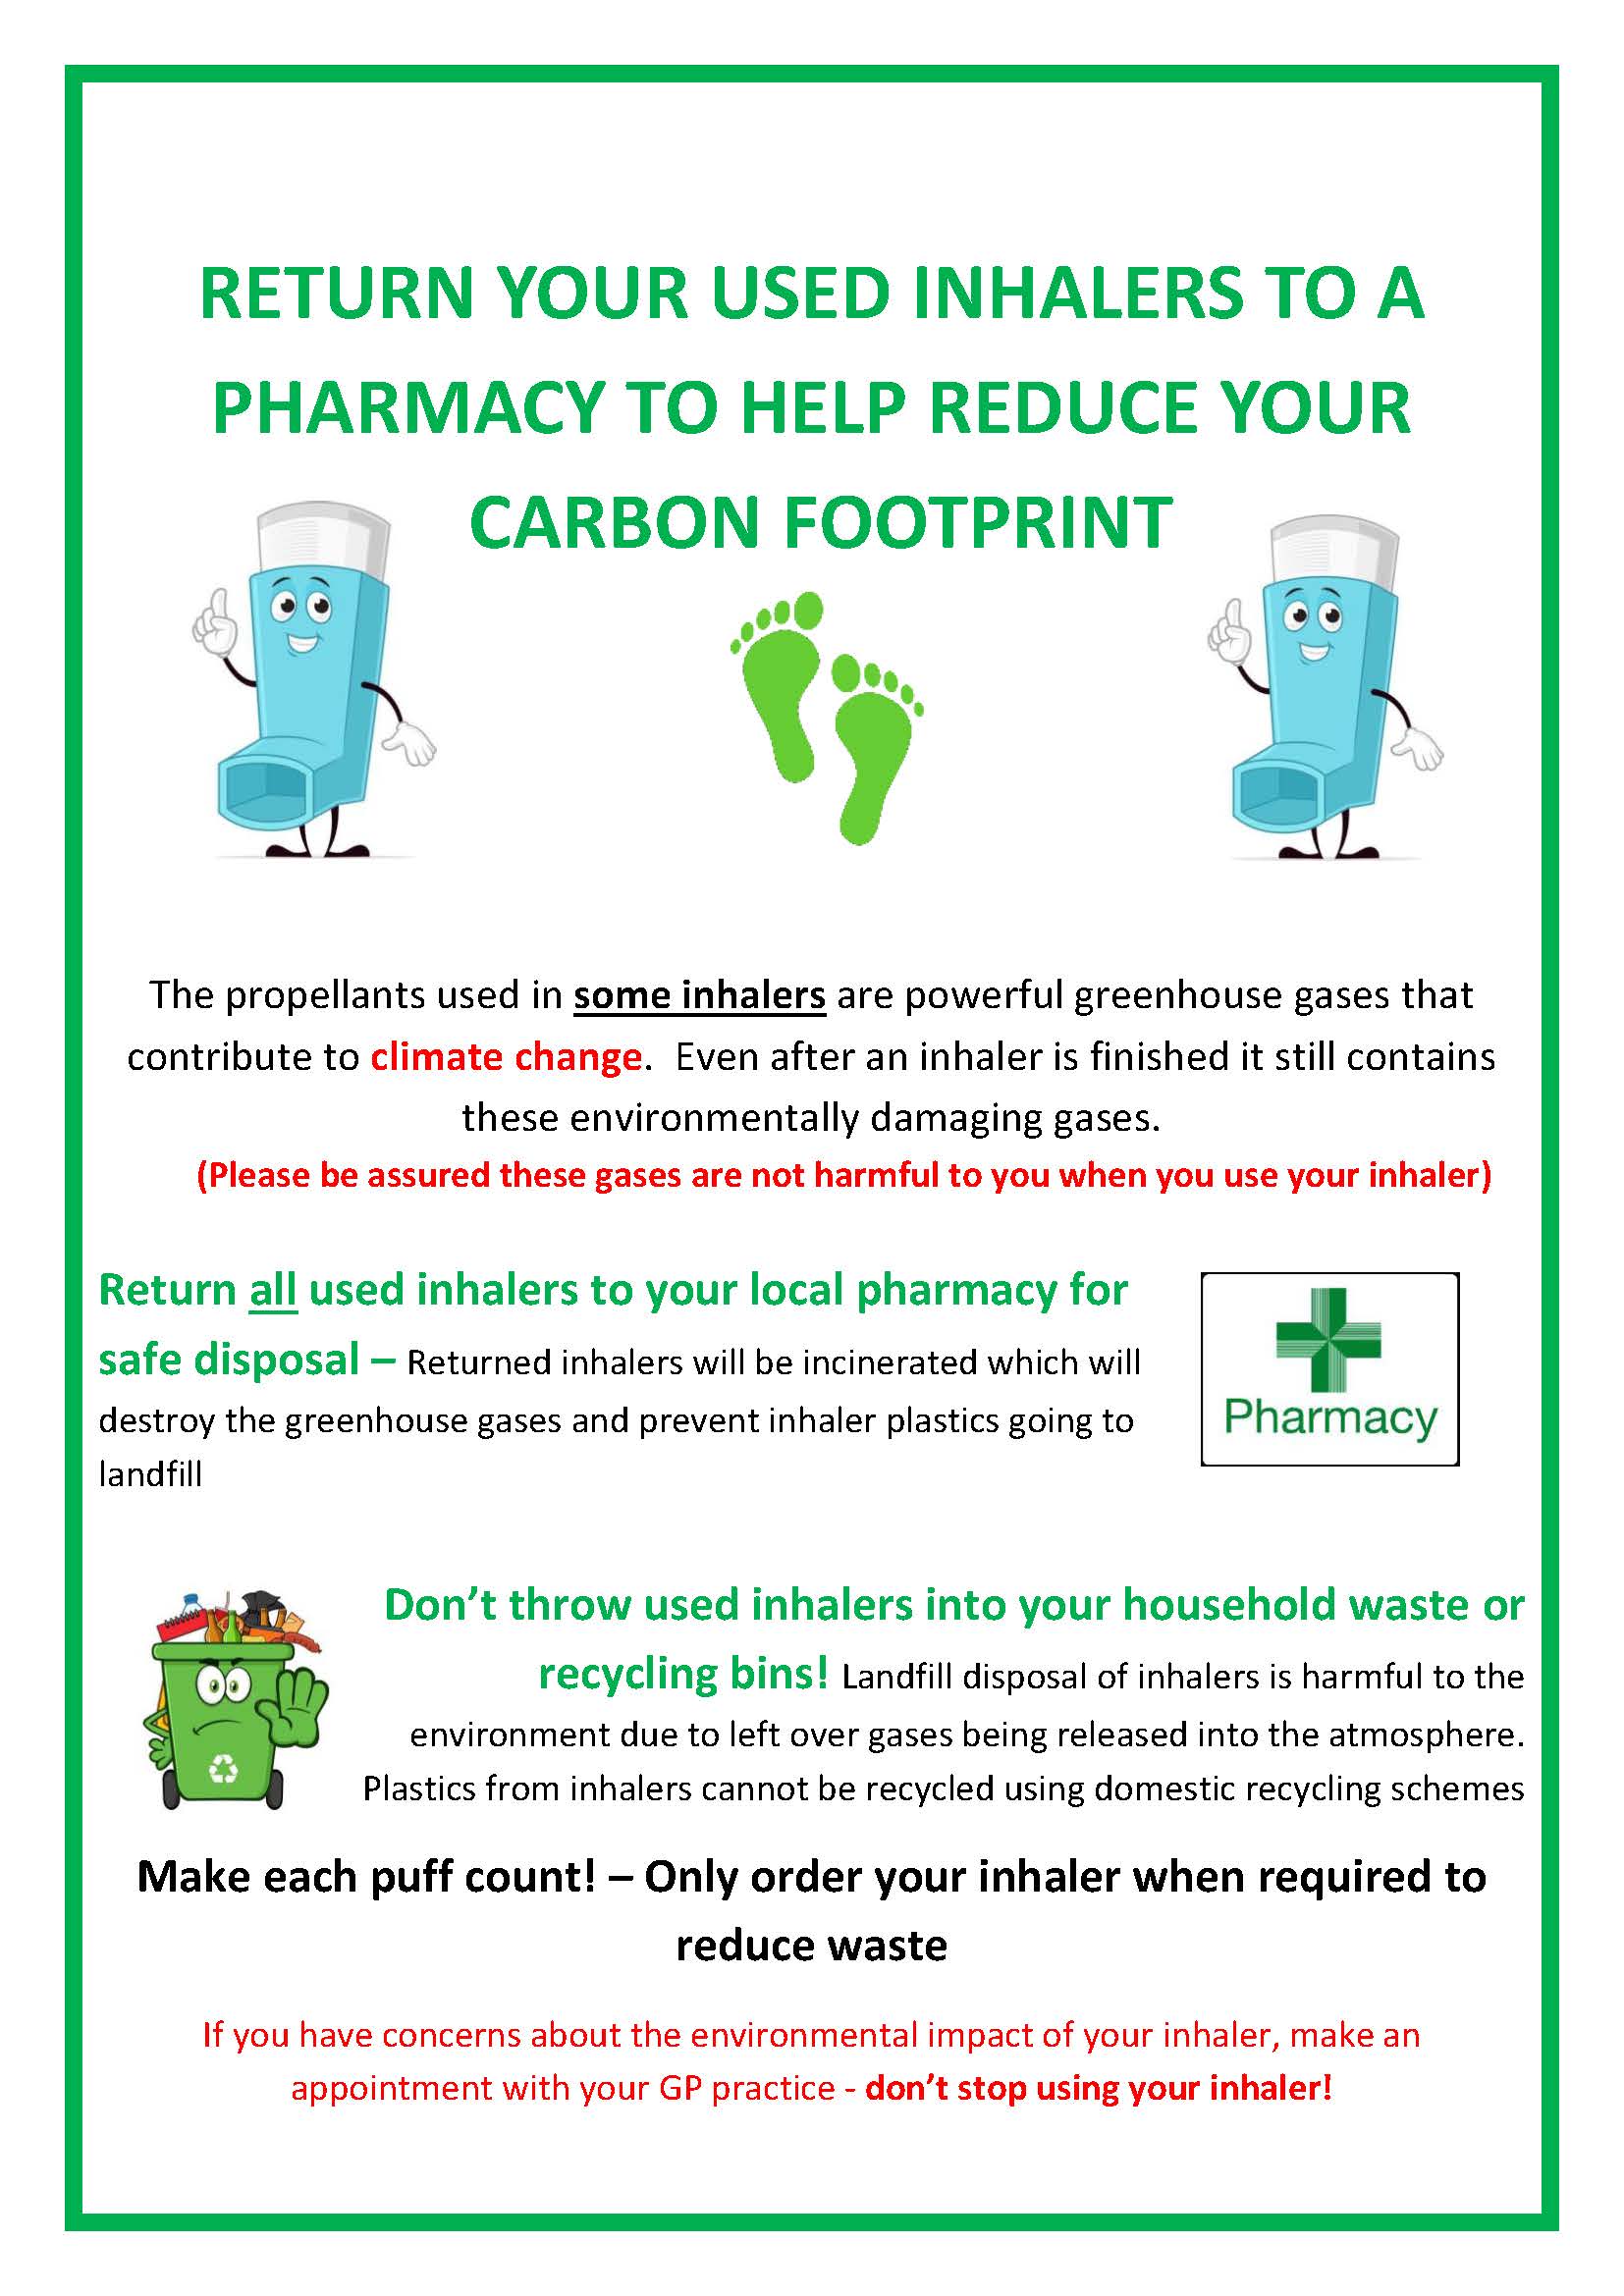 RETURN YOUR USED INHALERS TO A PHARMACY TO HELP REDUCE YOUR CARBON FOOTPRINT